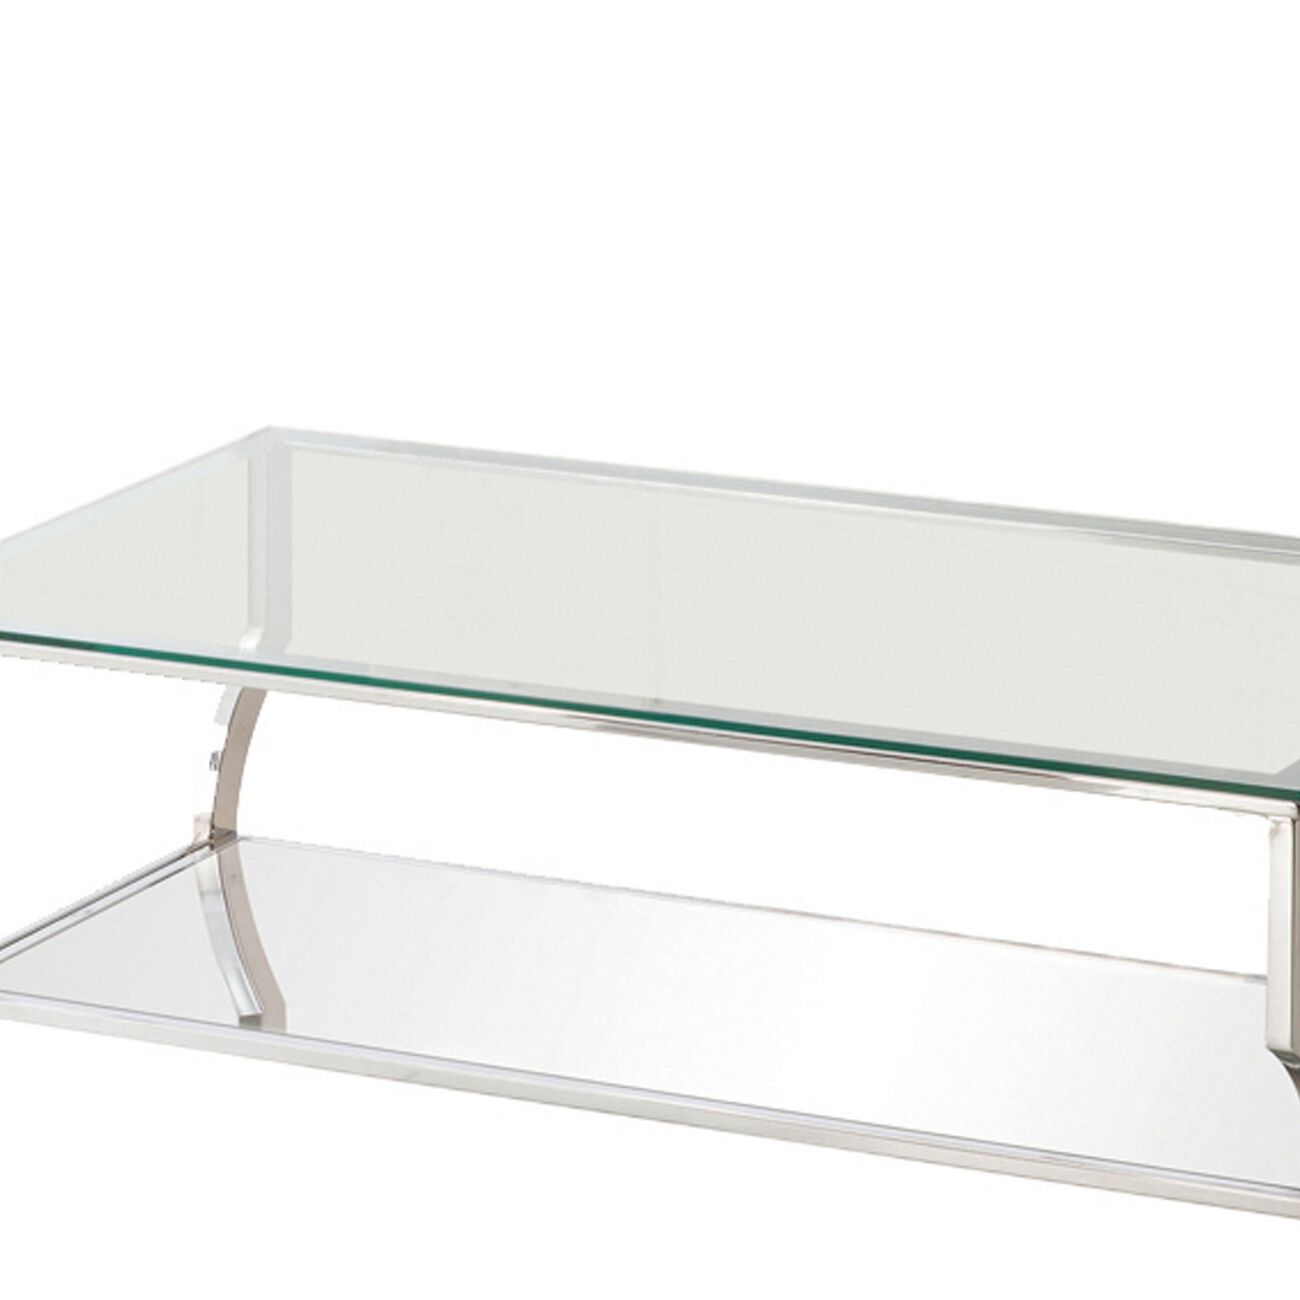 Glass Top Coffee Table with Metal Frame and Mirror Shelf, Chrome